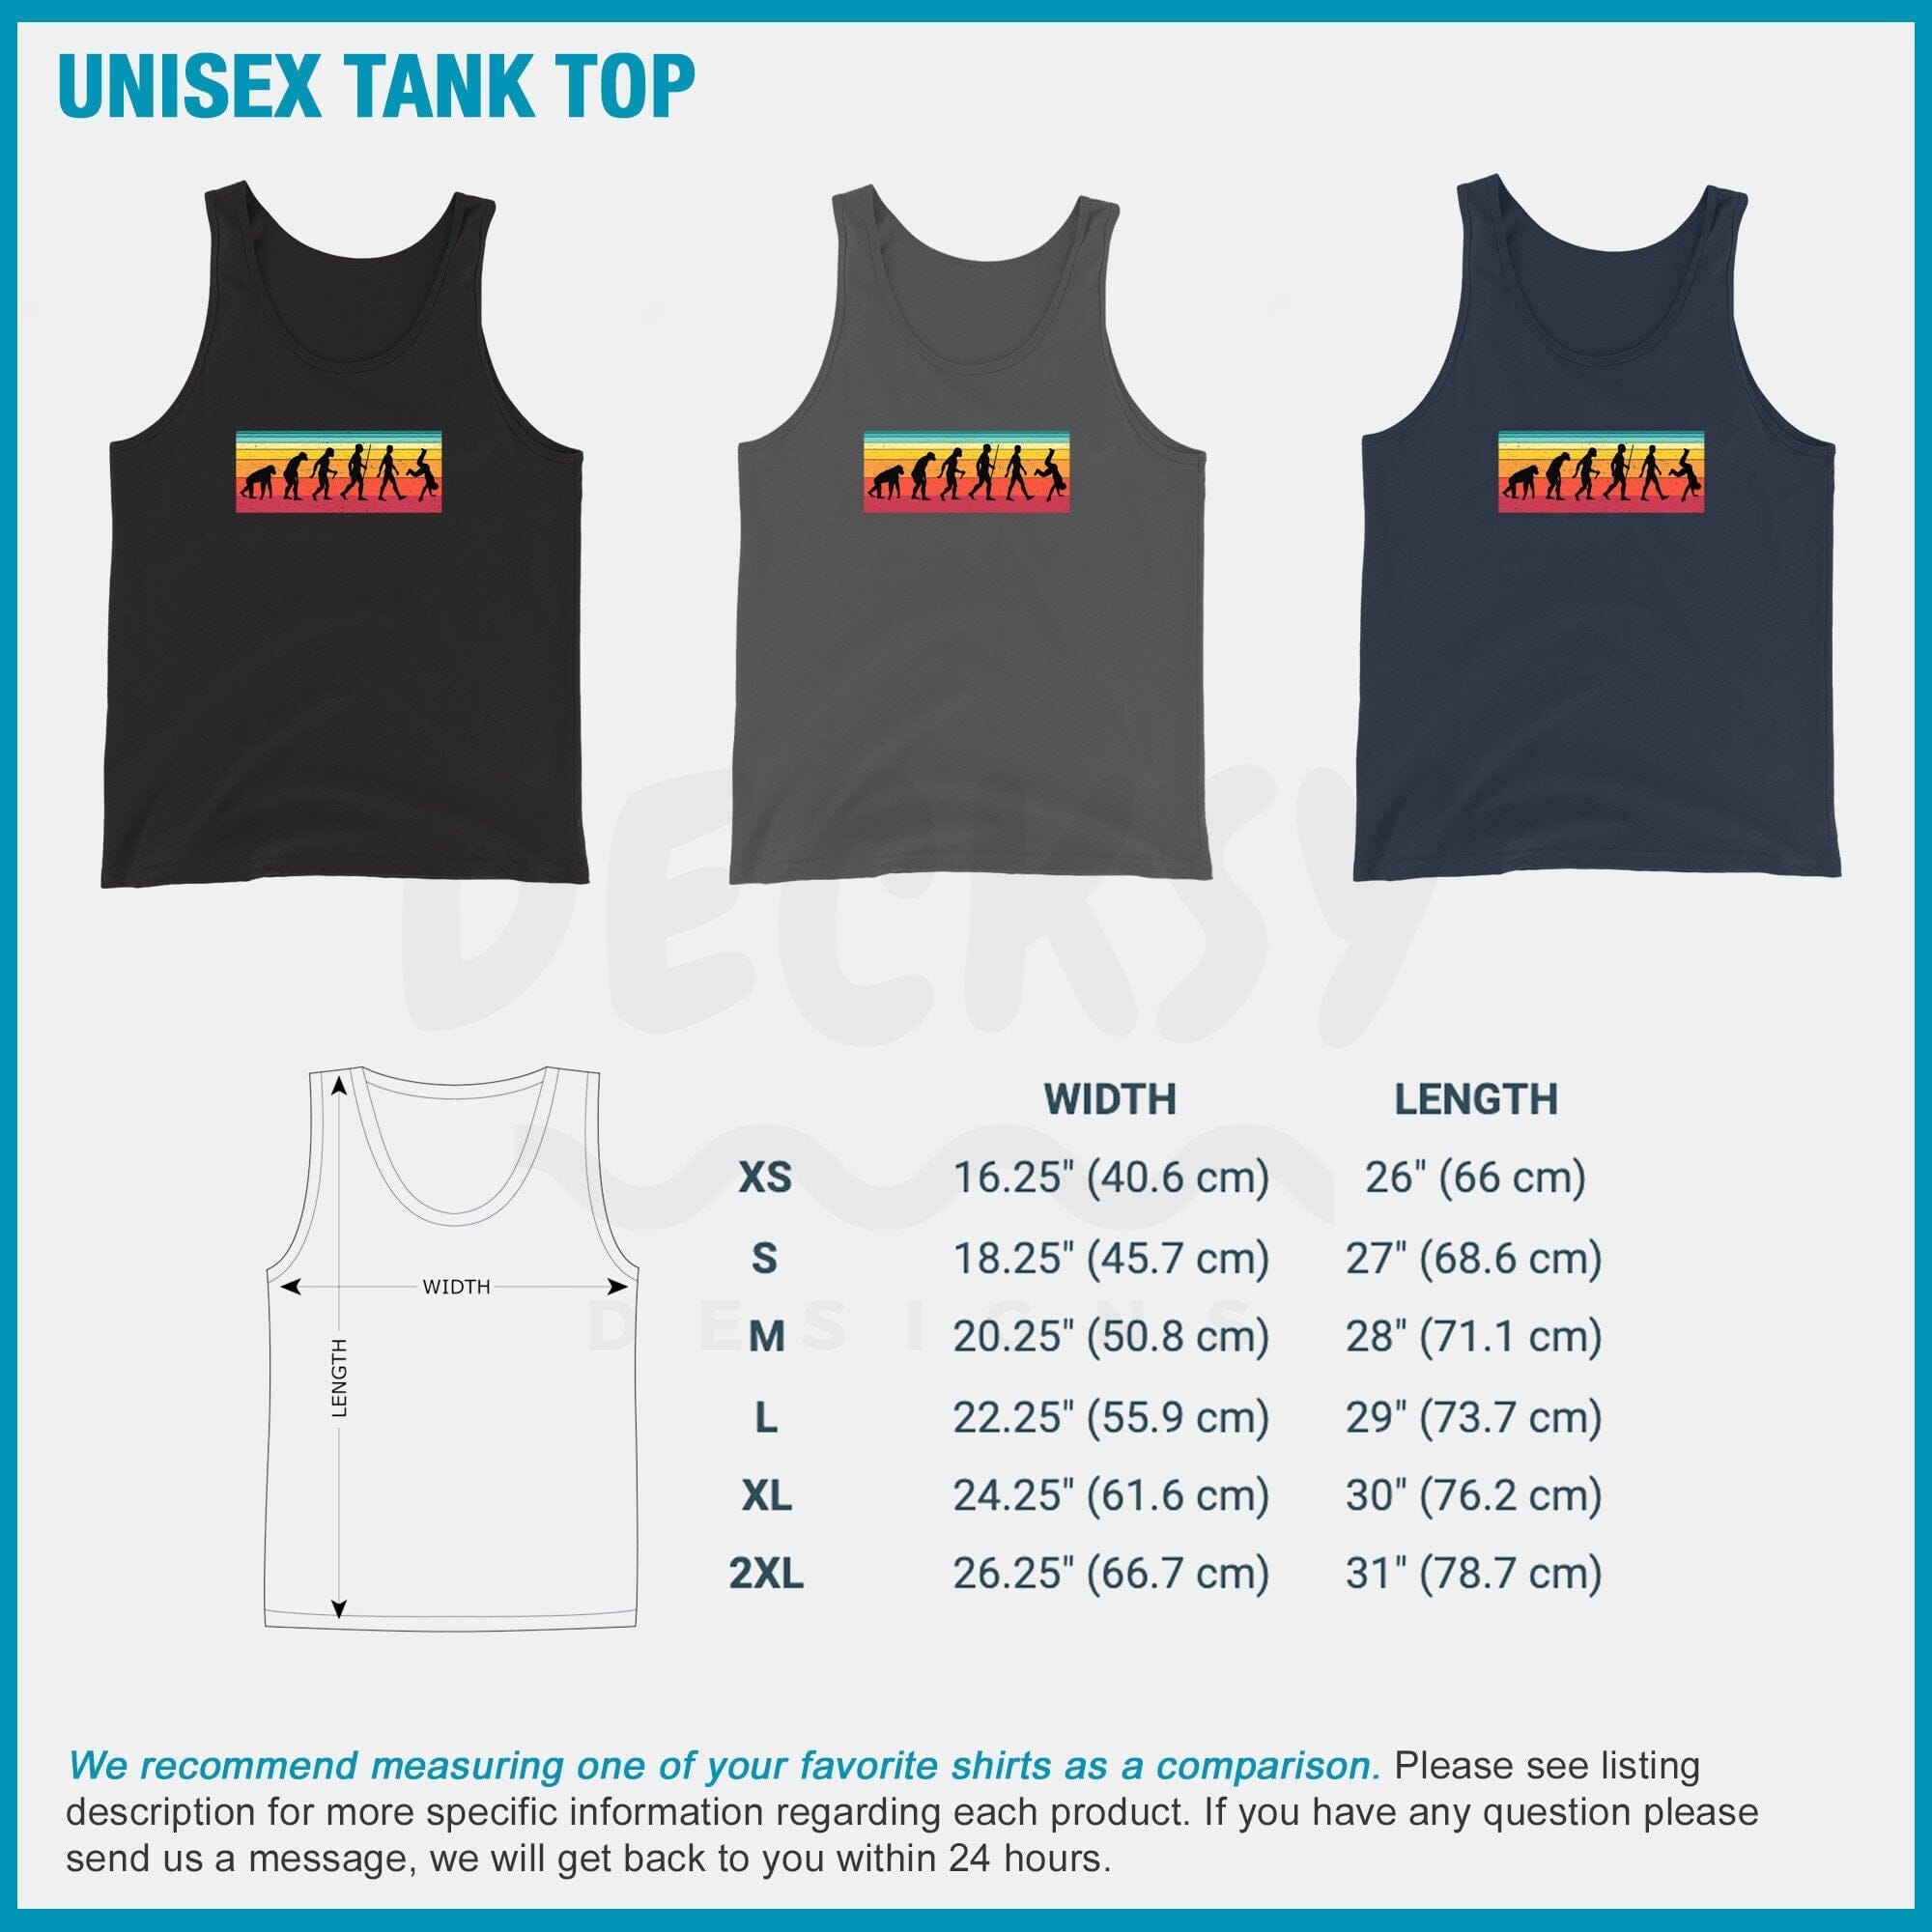 Handstand Shirt, Gifts For Gymnasts-Clothing:Gender-Neutral Adult Clothing:Tops & Tees:T-shirts:Graphic Tees-DecksyDesigns